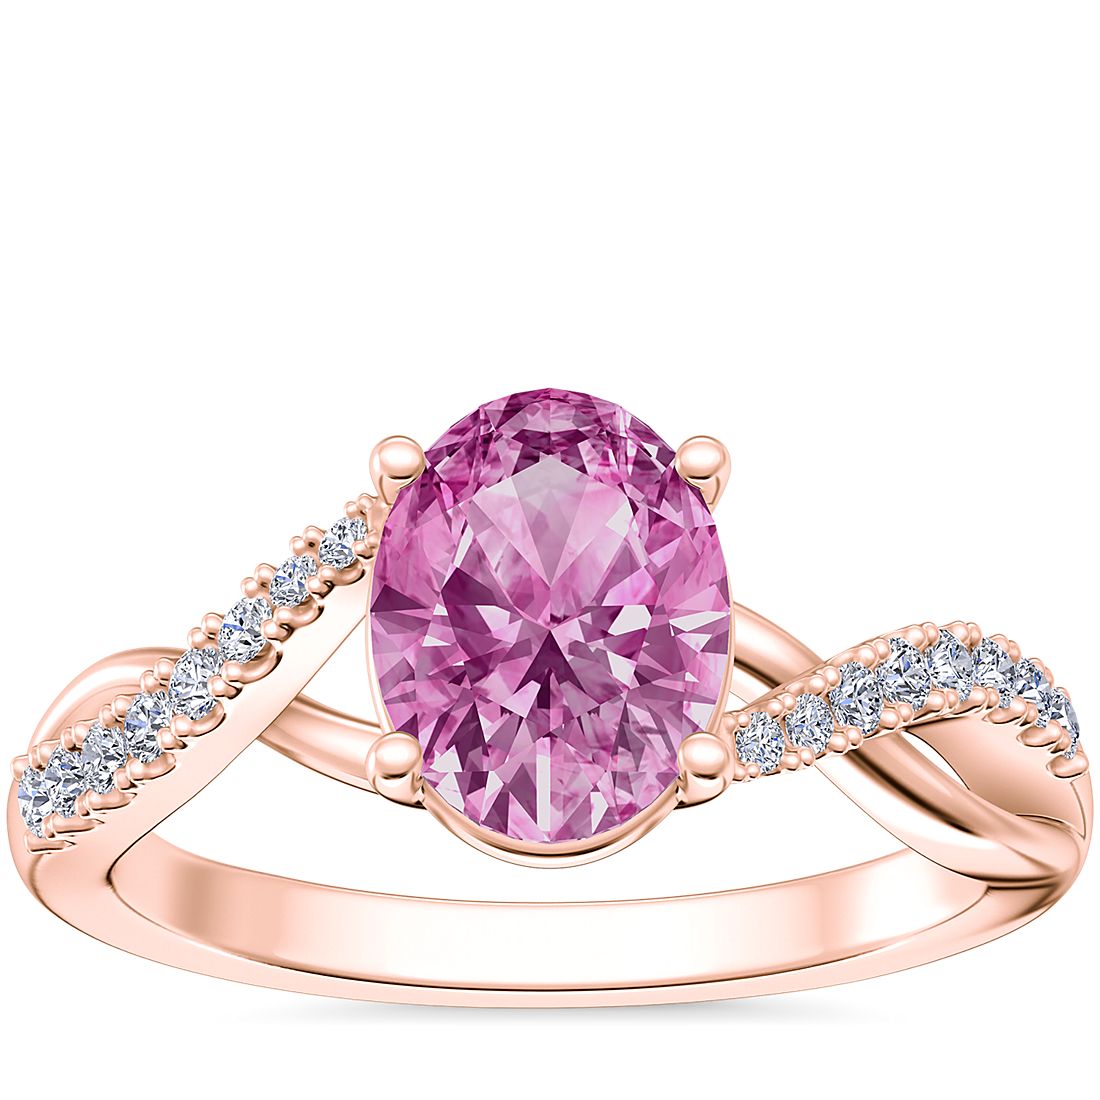 Classic Petite Twist Diamond Engagement Ring with Oval Pink Sapphire in 14k Rose Gold (8x6mm)